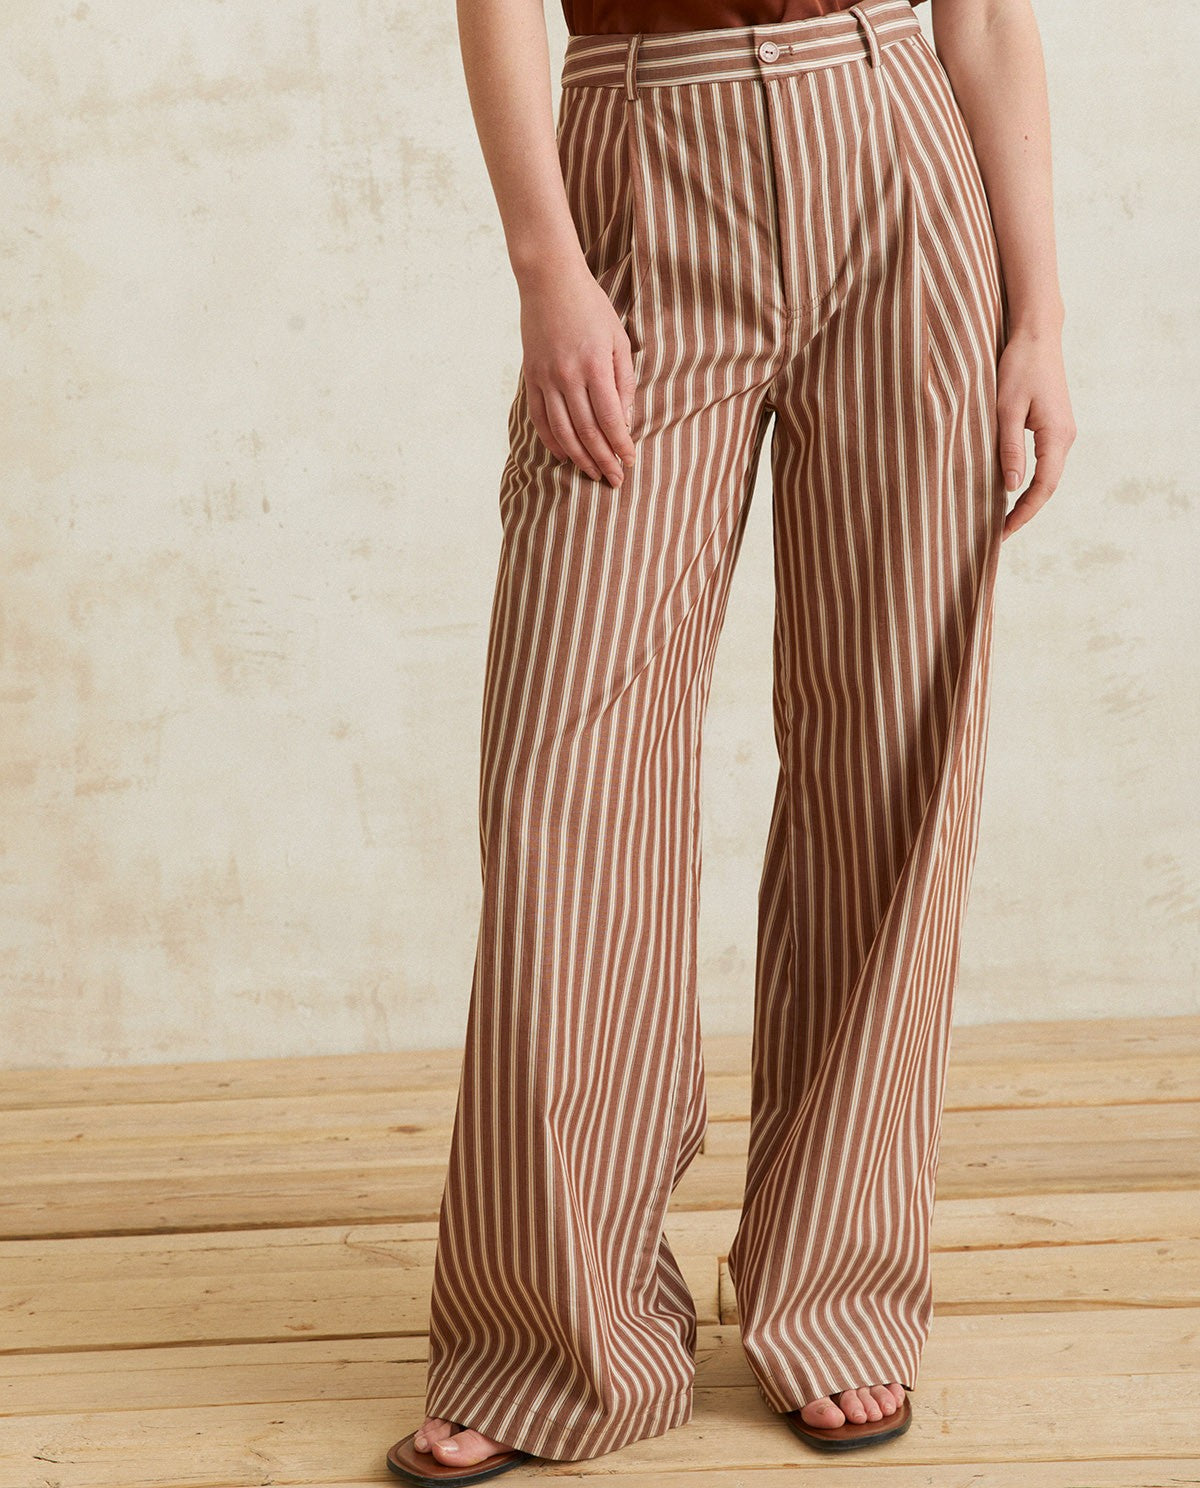 WIDE-LEG COTTON TROUSERS CHOCOLATE STRIPES  Ref. 40826